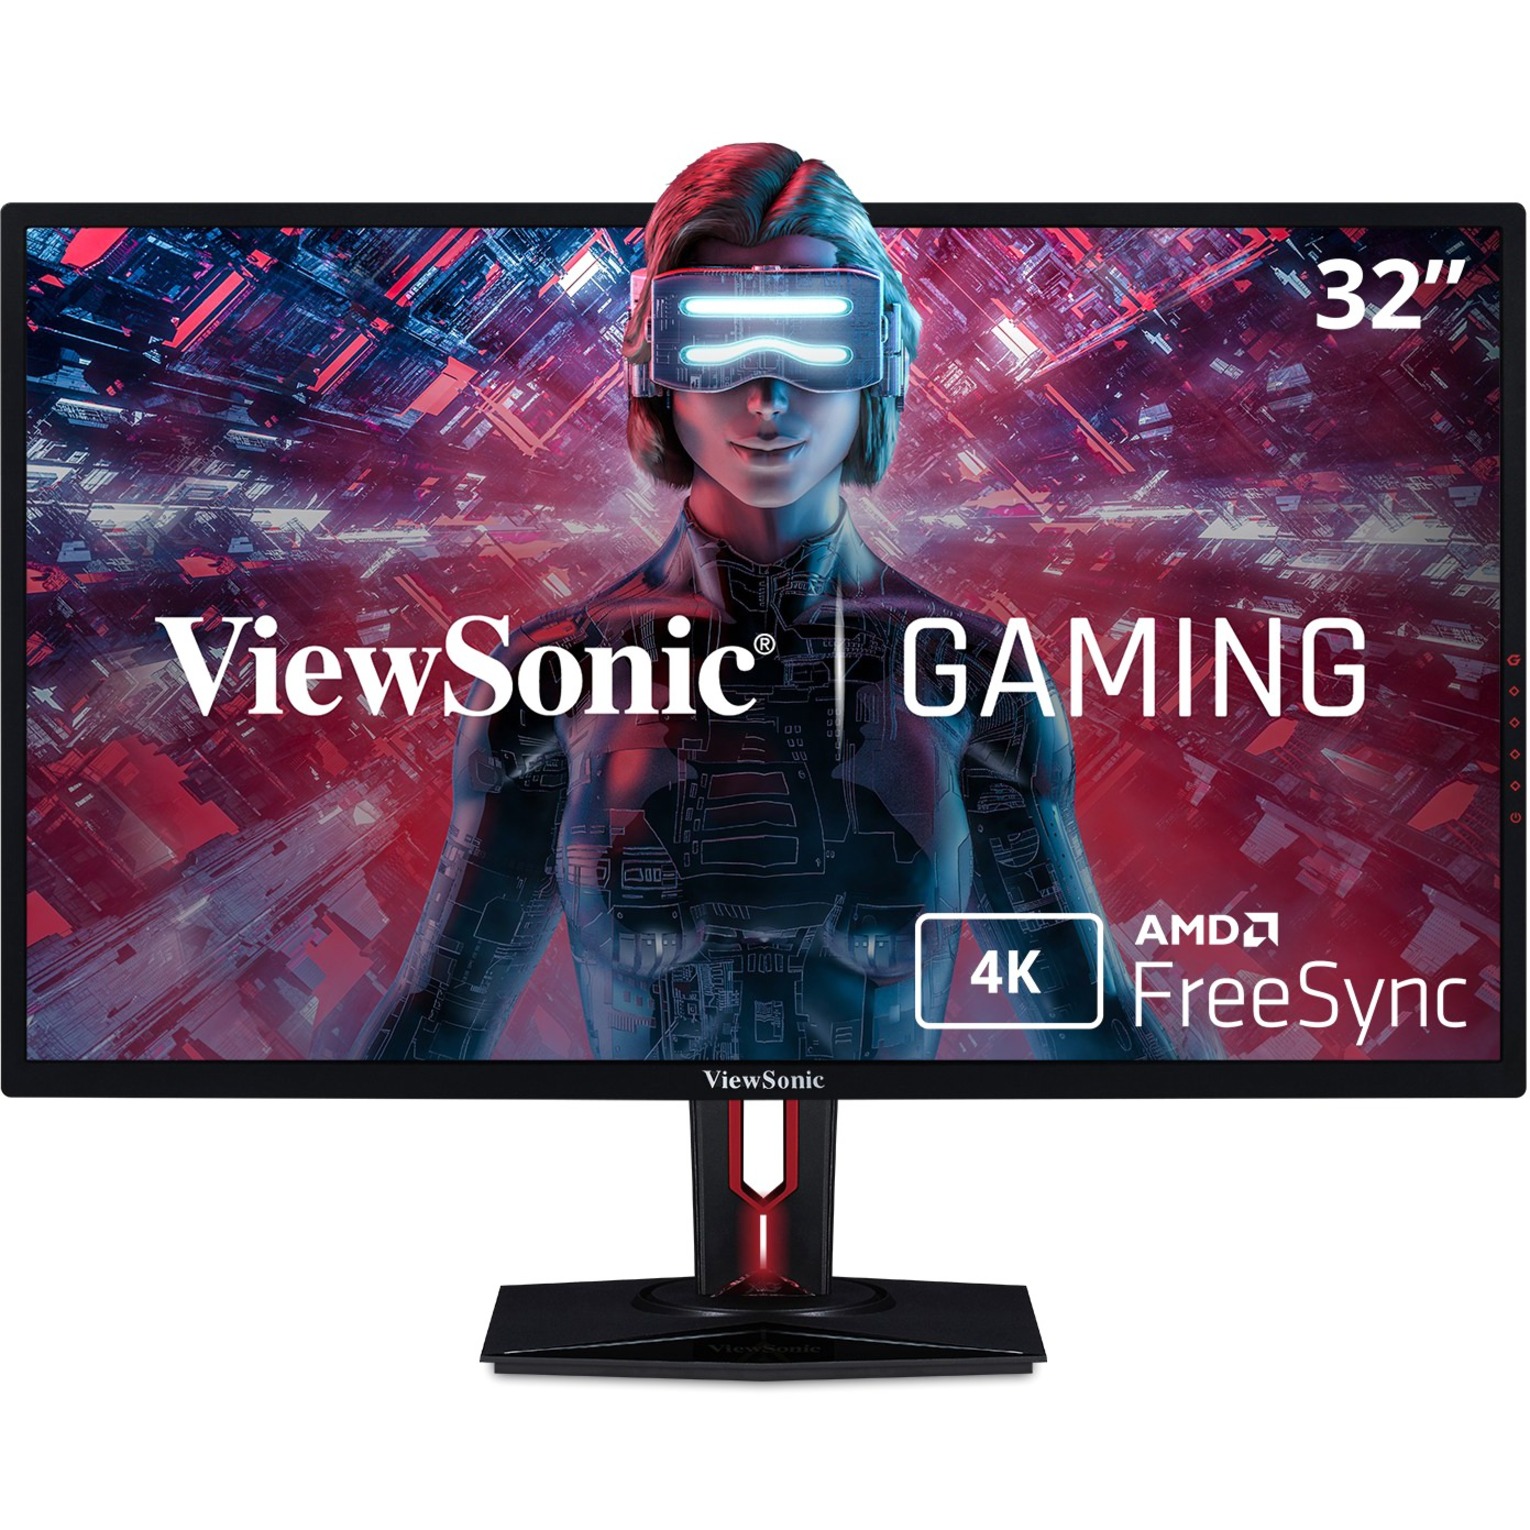 ViewSonic XG3220 32 Inch 60Hz 4K Gaming Monitor with FreeSync HDMI DP Eye Care Advanced Ergonomics and HDR10 for PC and Console Gaming - image 1 of 13